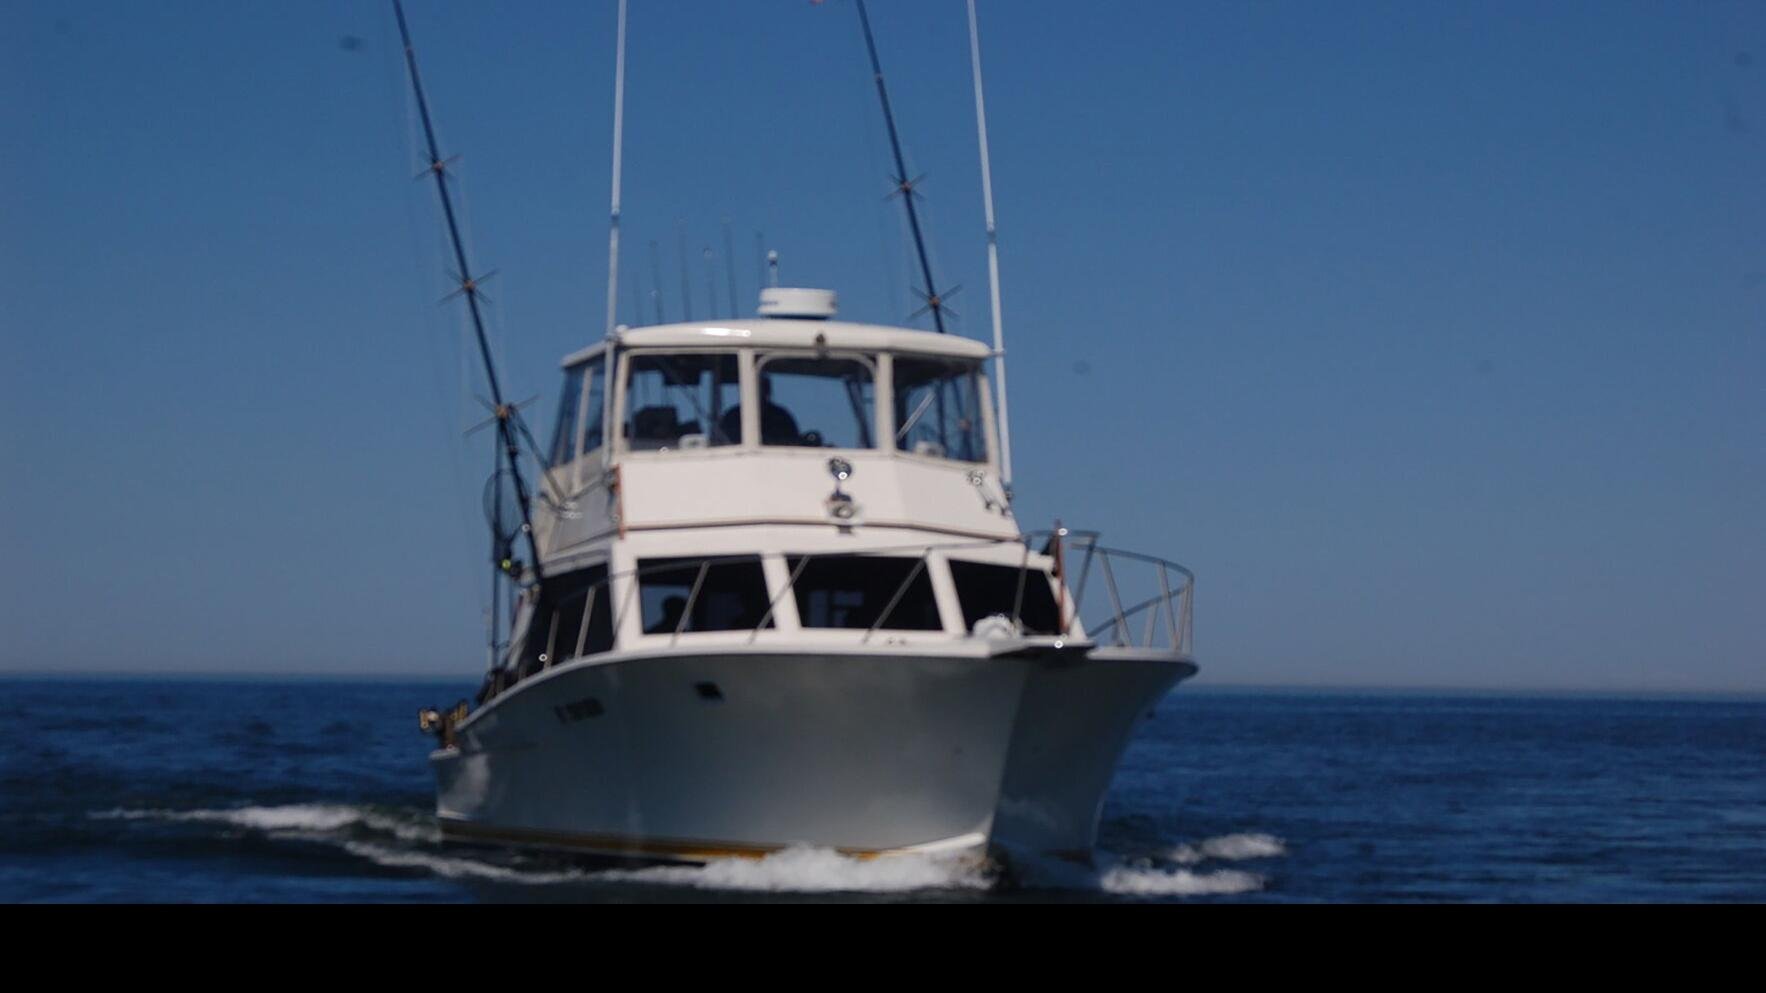 Fishing Boats Auction Results in ROCKY MOUNT, VIRGINIA